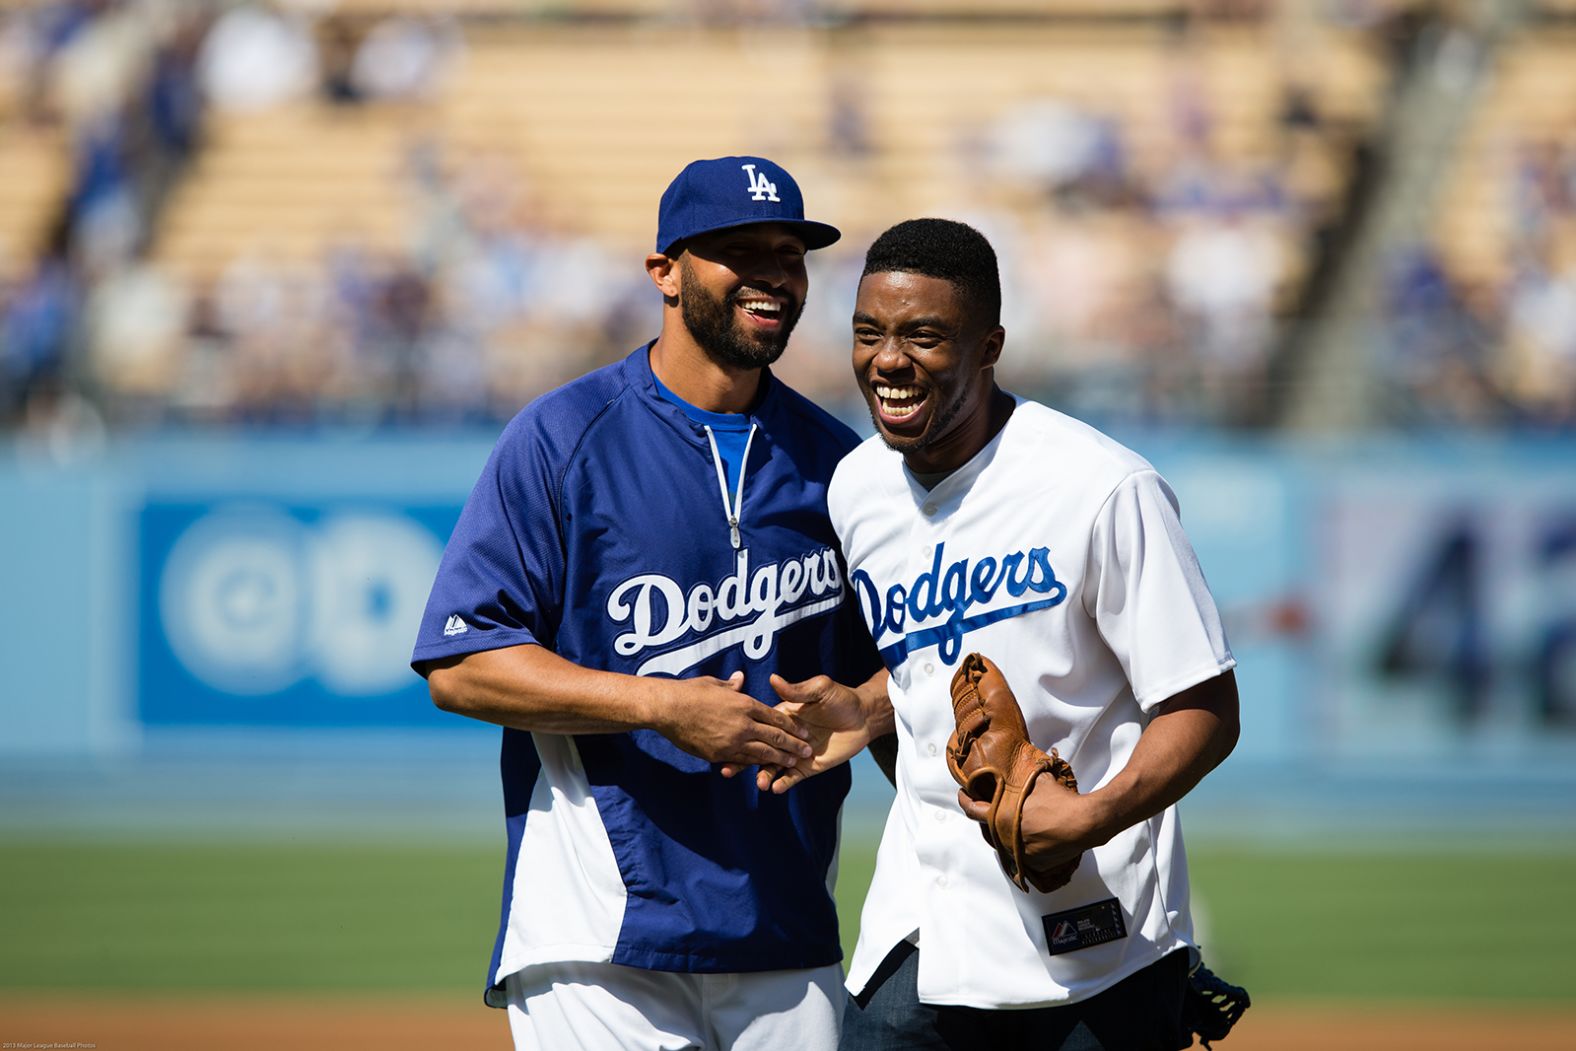 Boseman laughs with baseball star Matt Kemp after throwing out the first pitch at a Los Angeles Dodgers game in 2013.